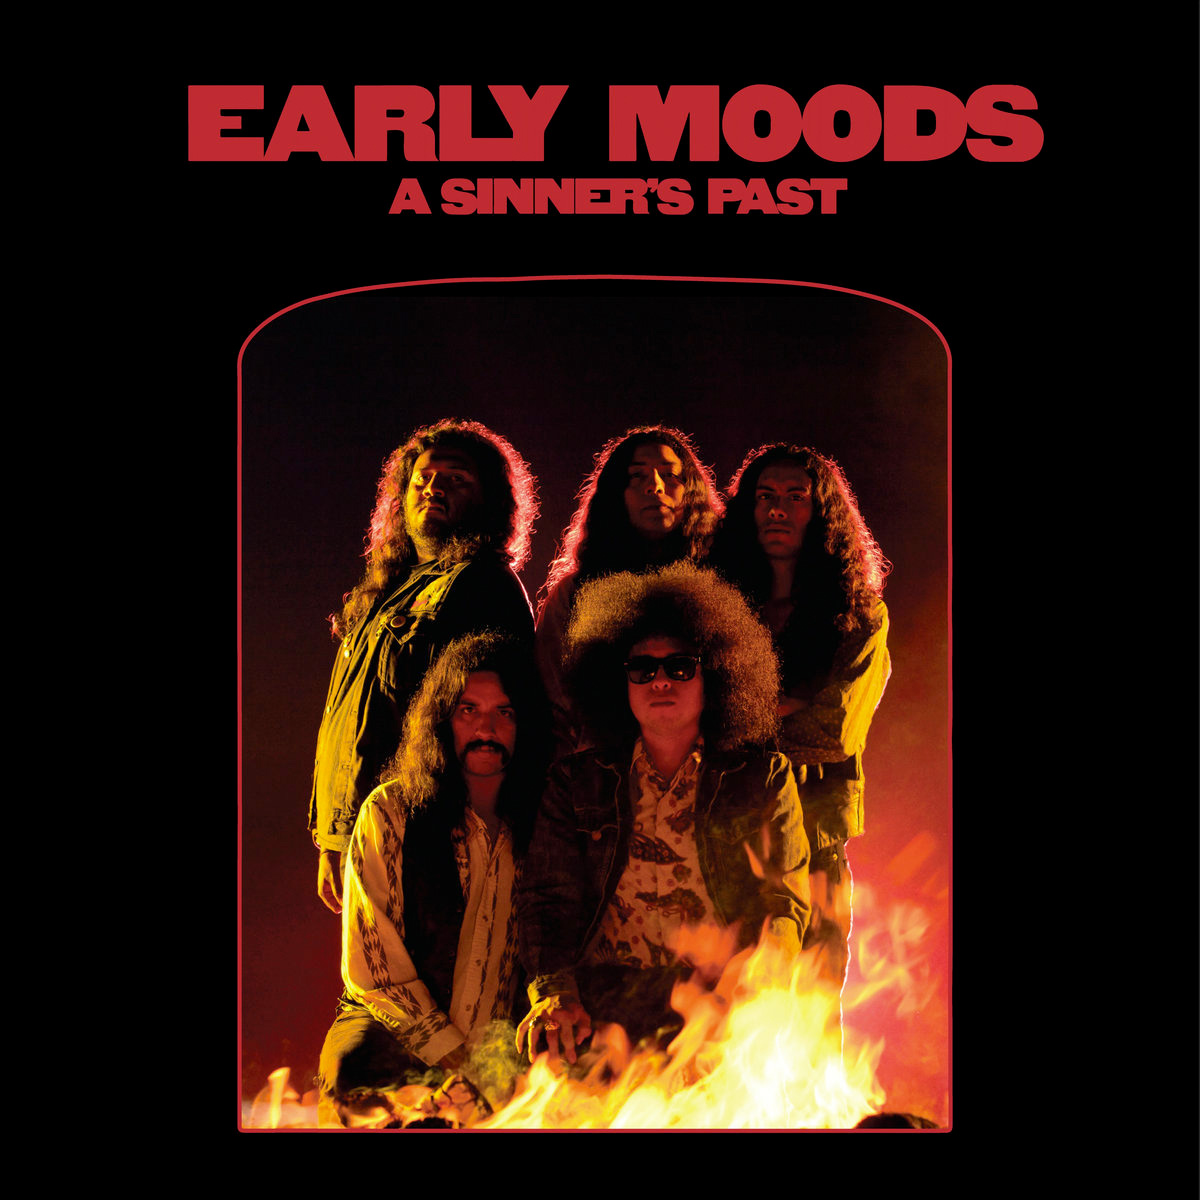 A Sinner’s Past by Early Moods